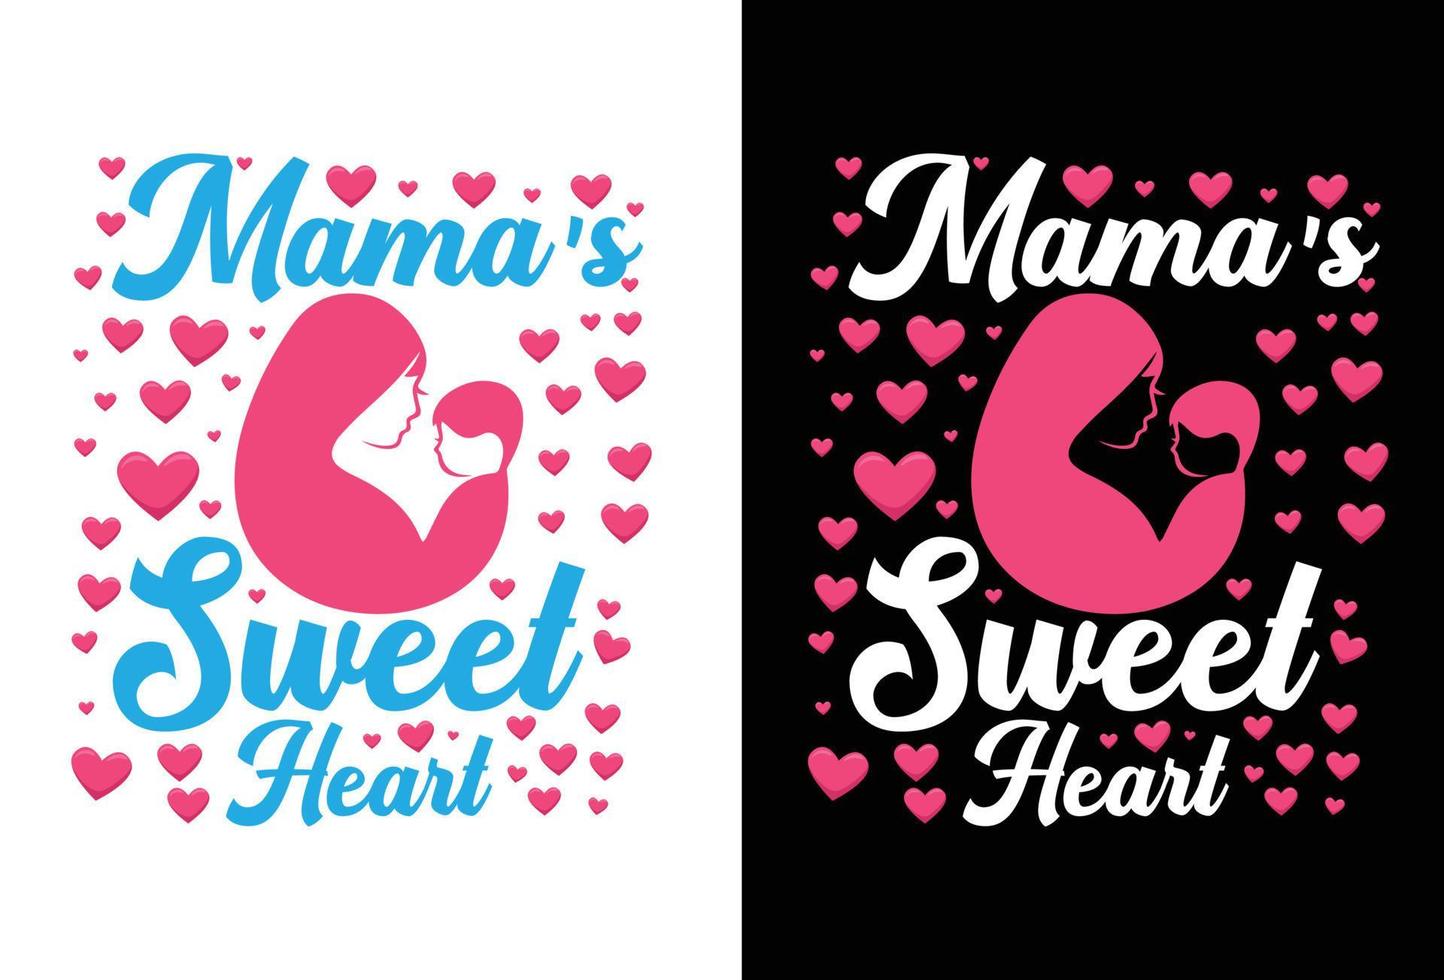 Happy Mothers Day T shirt, Mothers day t shirt bundle, mothers day t shirt vector, mothers day element vector, lettering mom t shirt vector